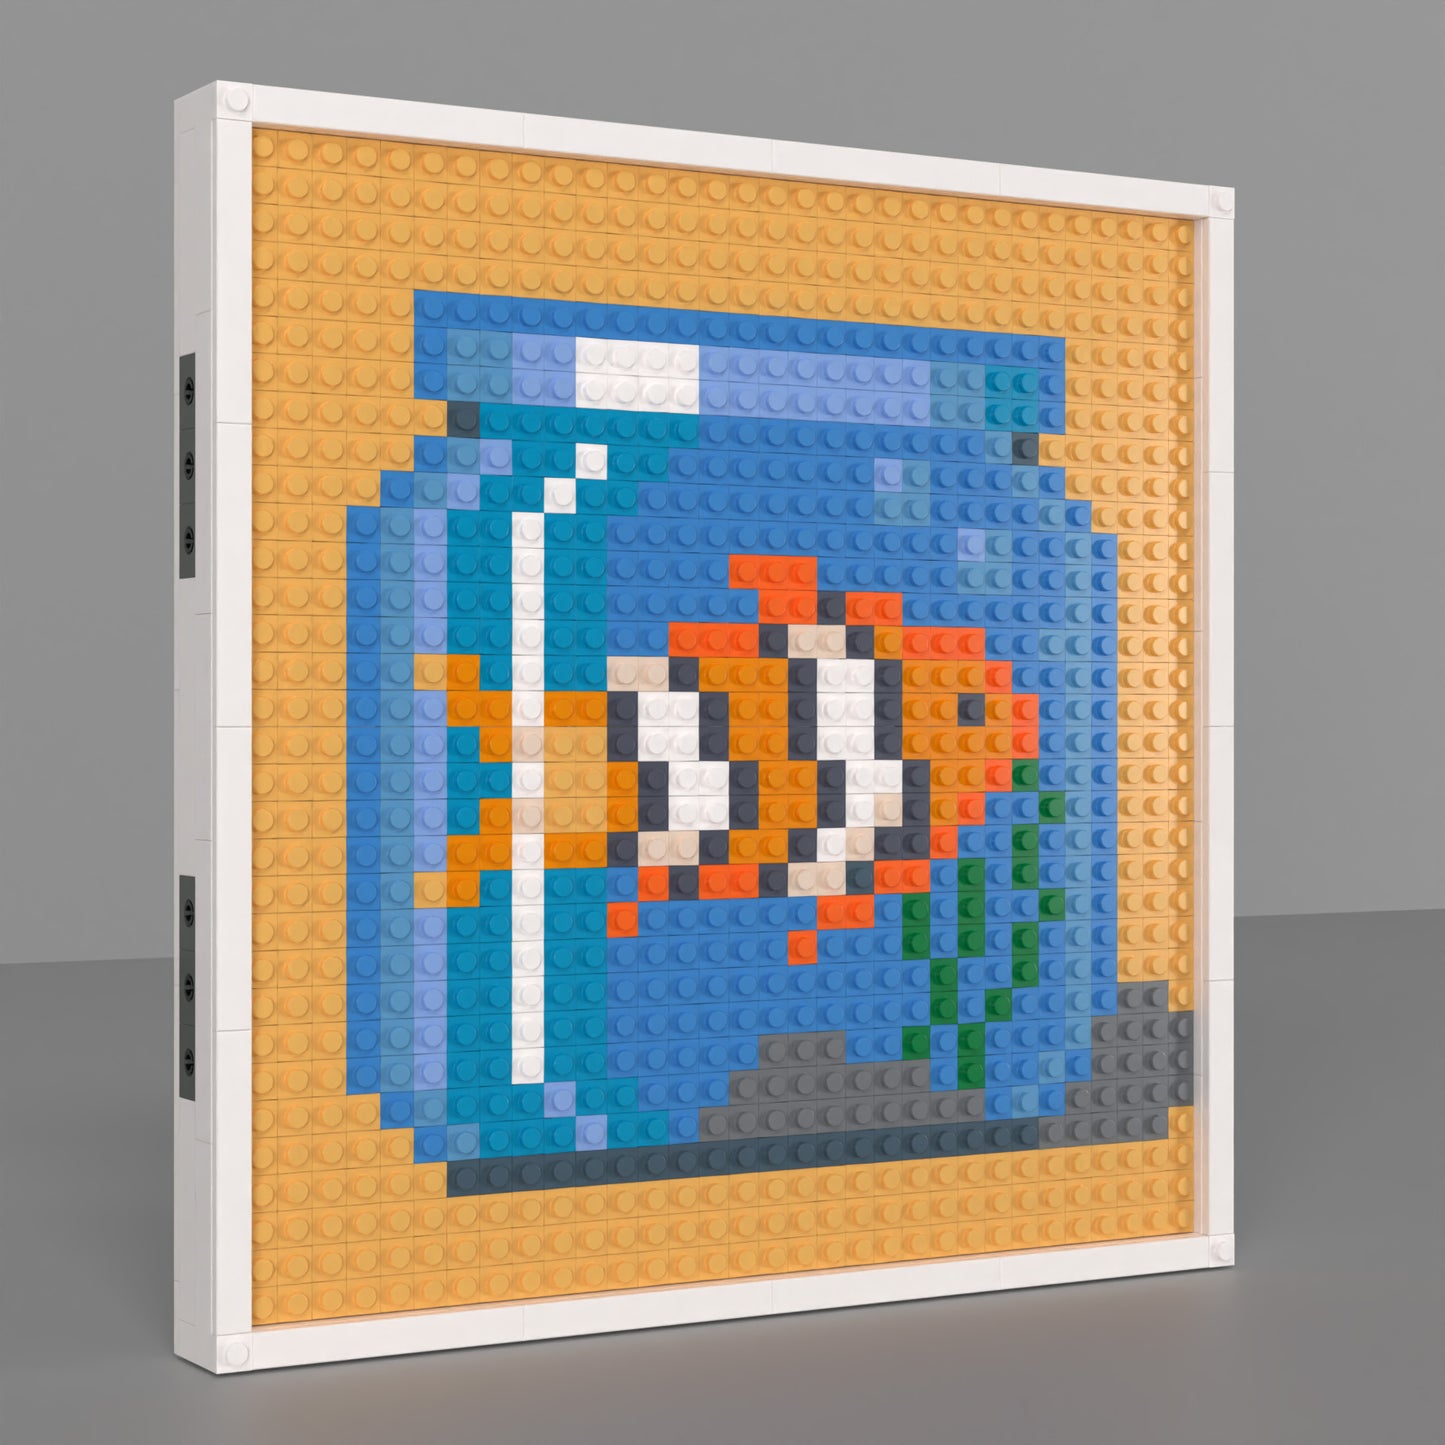 Clownfish in Fishbowl Building Brick Pixel Art - 32*32 Modular Compatible with Lego